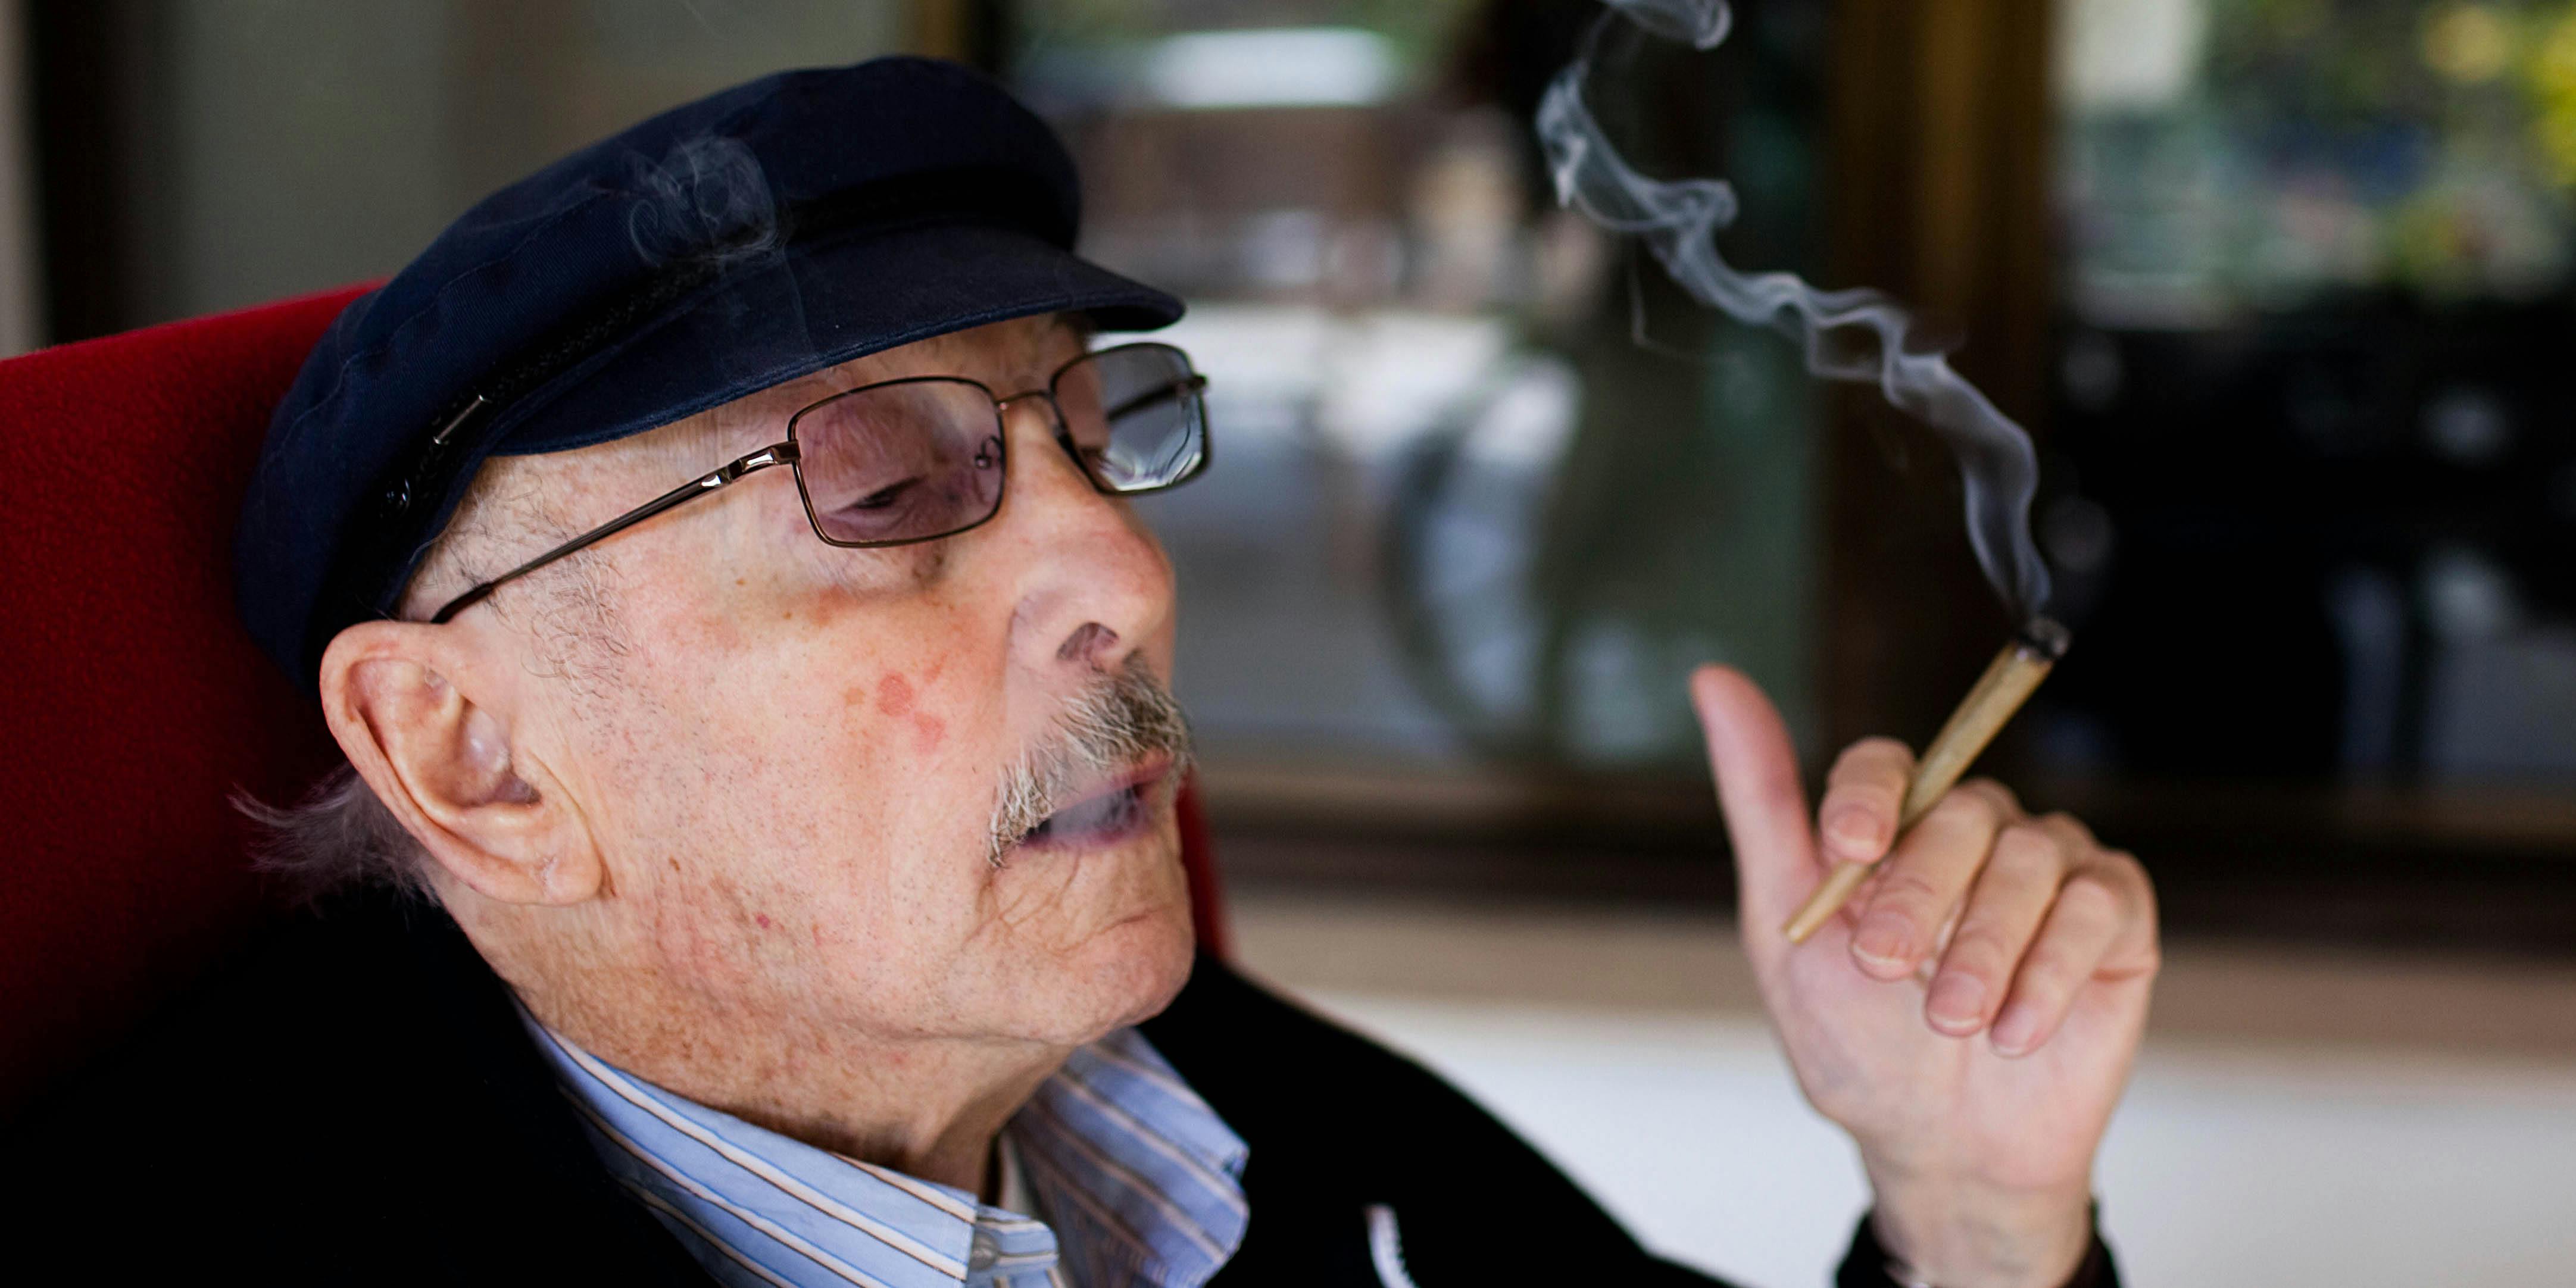 A man smokes cannabis at a nursing home in Israel. Most pain specialists are prescribing cannabis to patients to deal with pain.